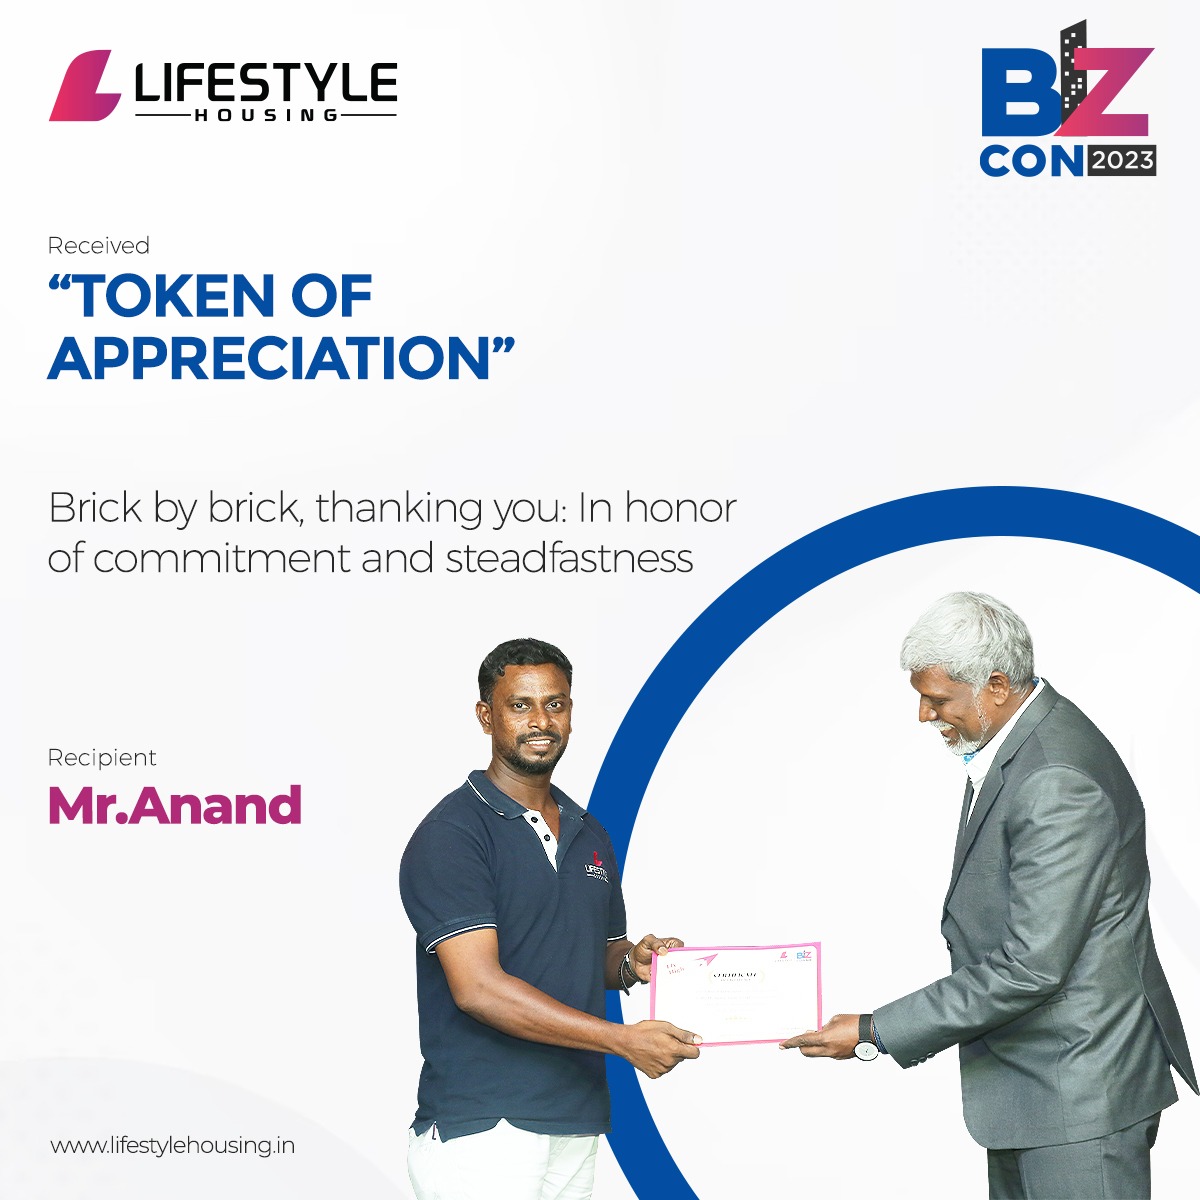 Mr. Anand receives a prestigious Long Service Award and Token of Appreciation from Lifestyle Housing, honoring his unwavering dedication and invaluable contributions over three years

#professionalism #milestoneachievement #lifestylehousing #longservice #3years #appreciation